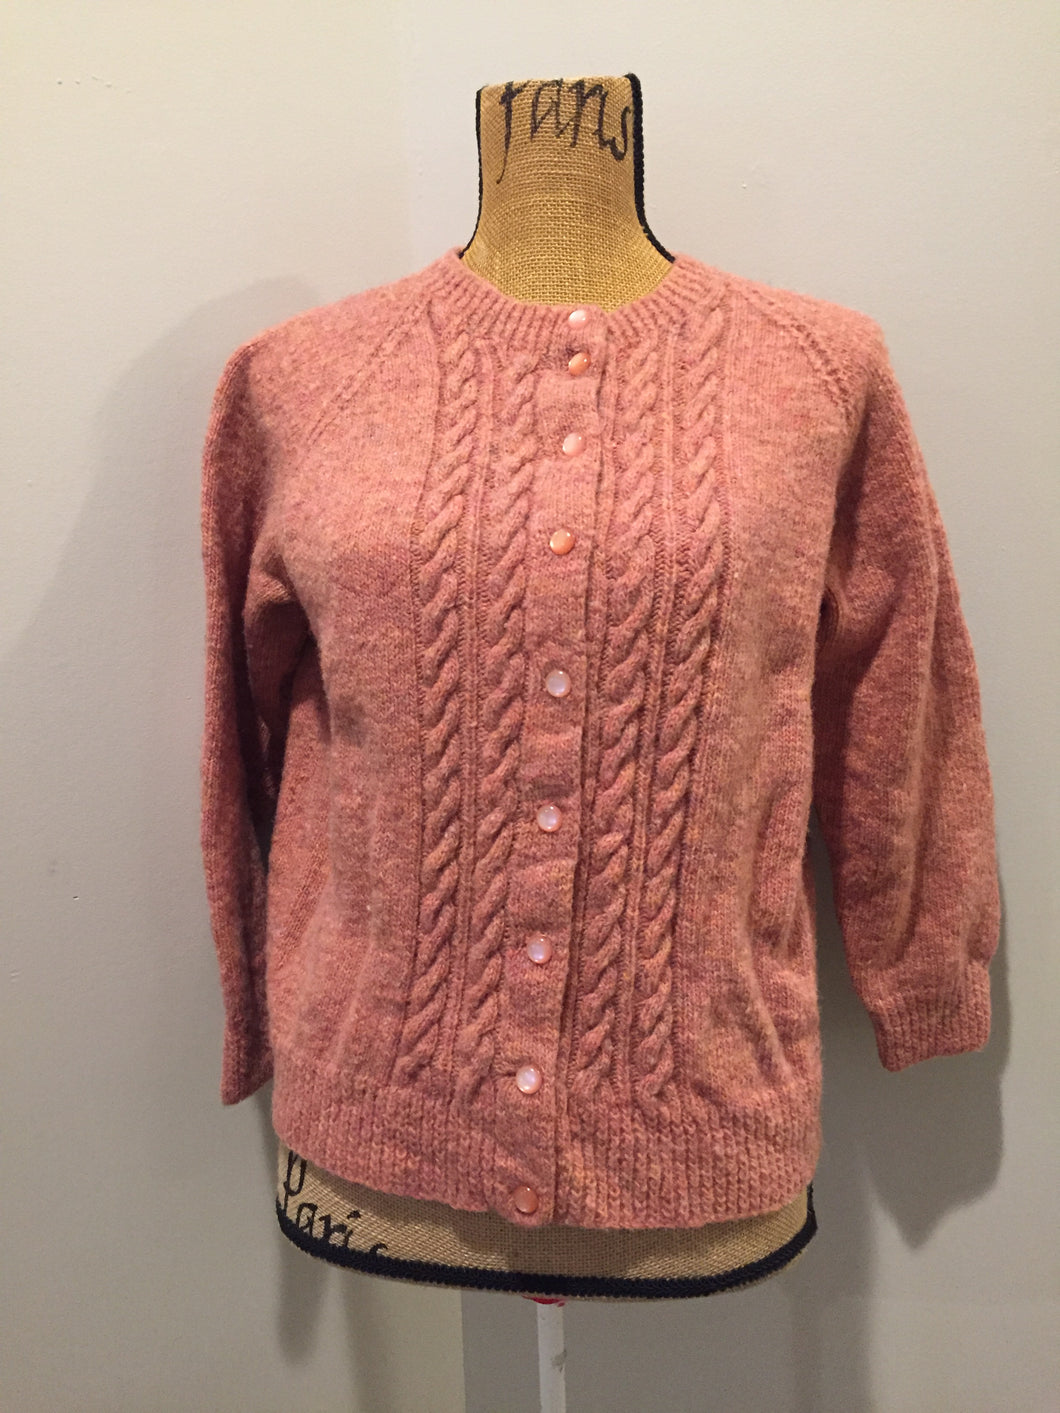 Kingspier Vintage - Hand Knit 100% wool cardigan in pink with cable knit stitch panel running down the center front. Size XS/S.